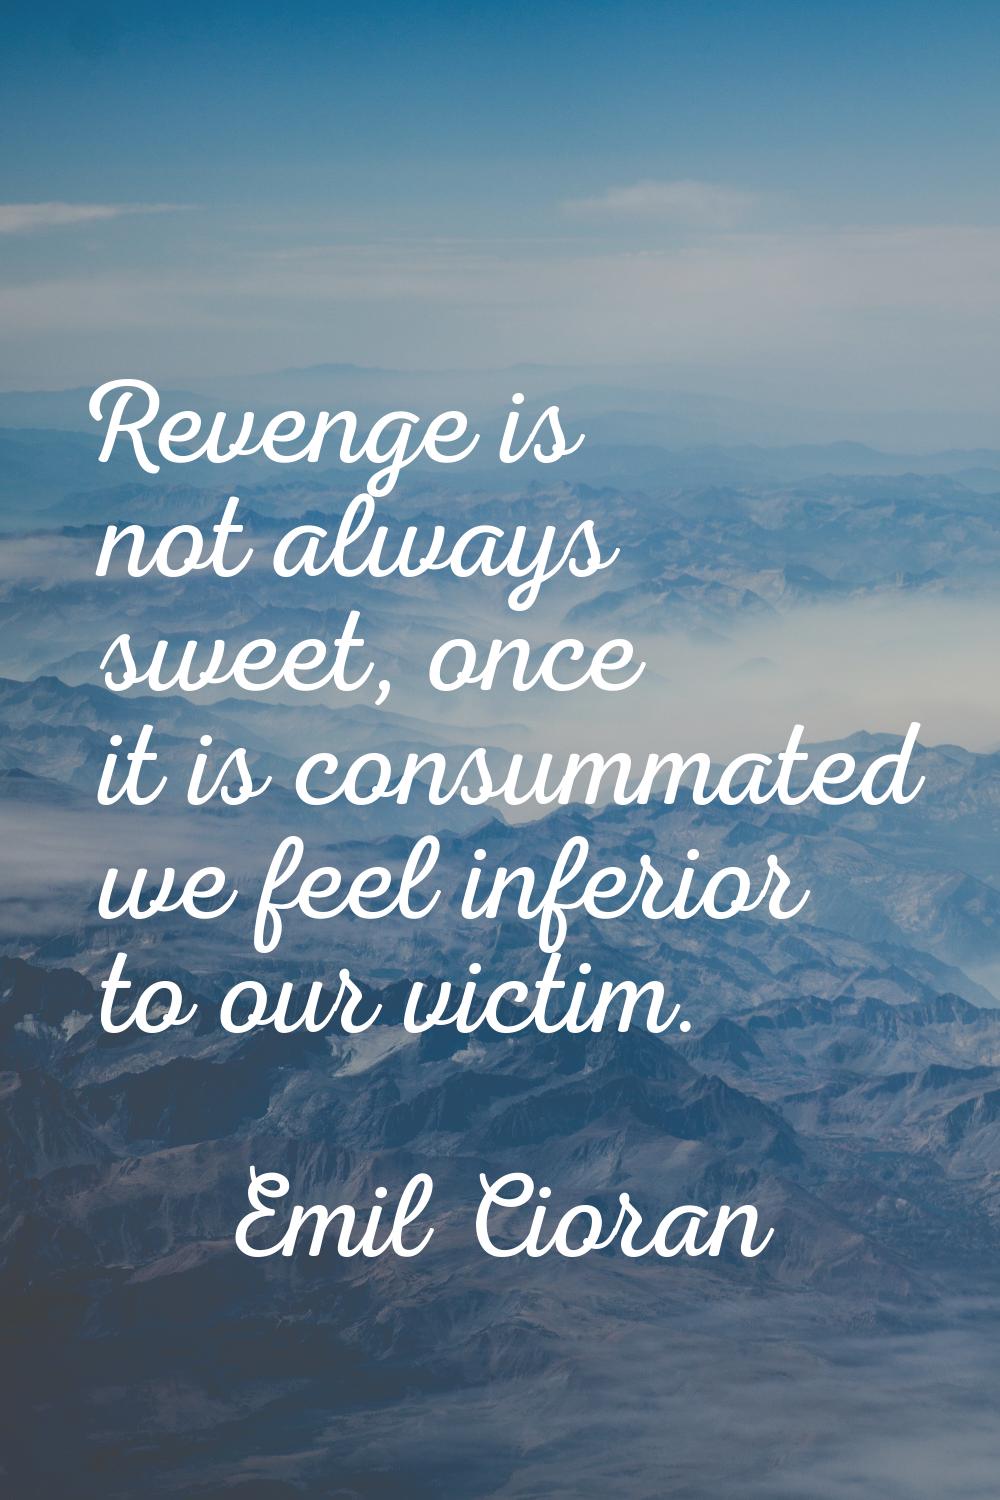 Revenge is not always sweet, once it is consummated we feel inferior to our victim.